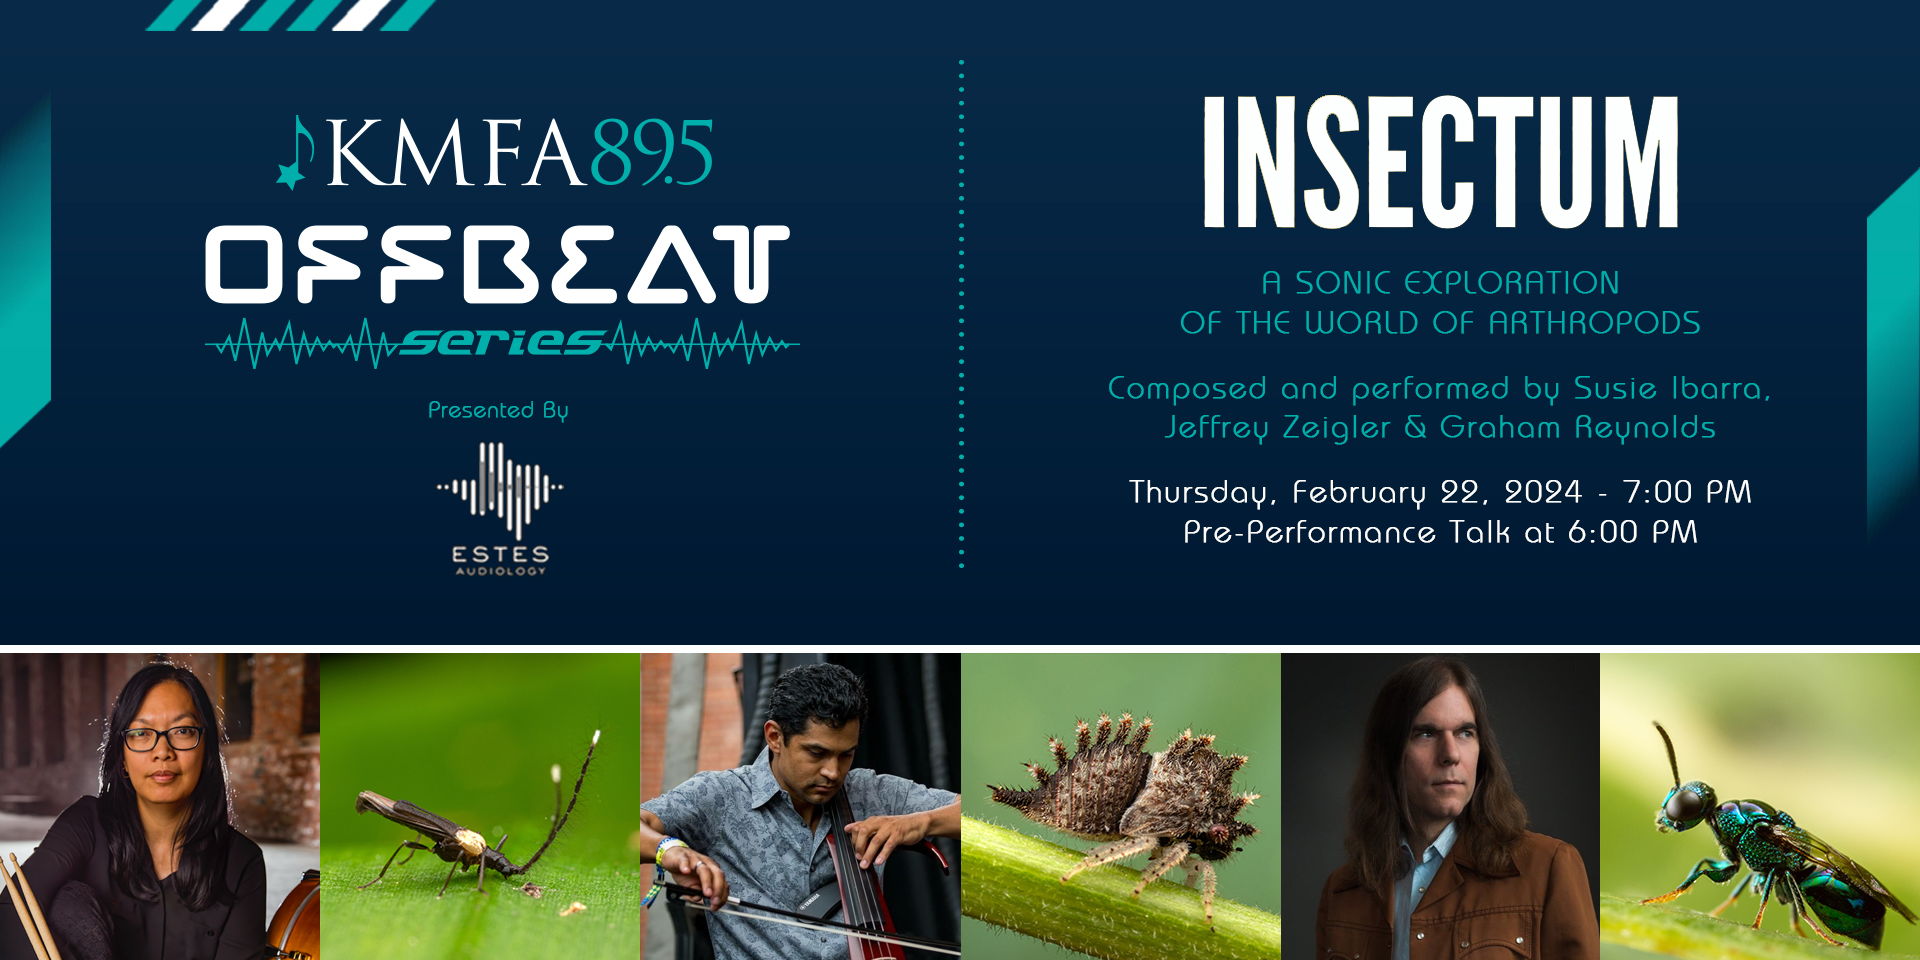 KMFA's Offbeat Series: INSECTUM promotional image